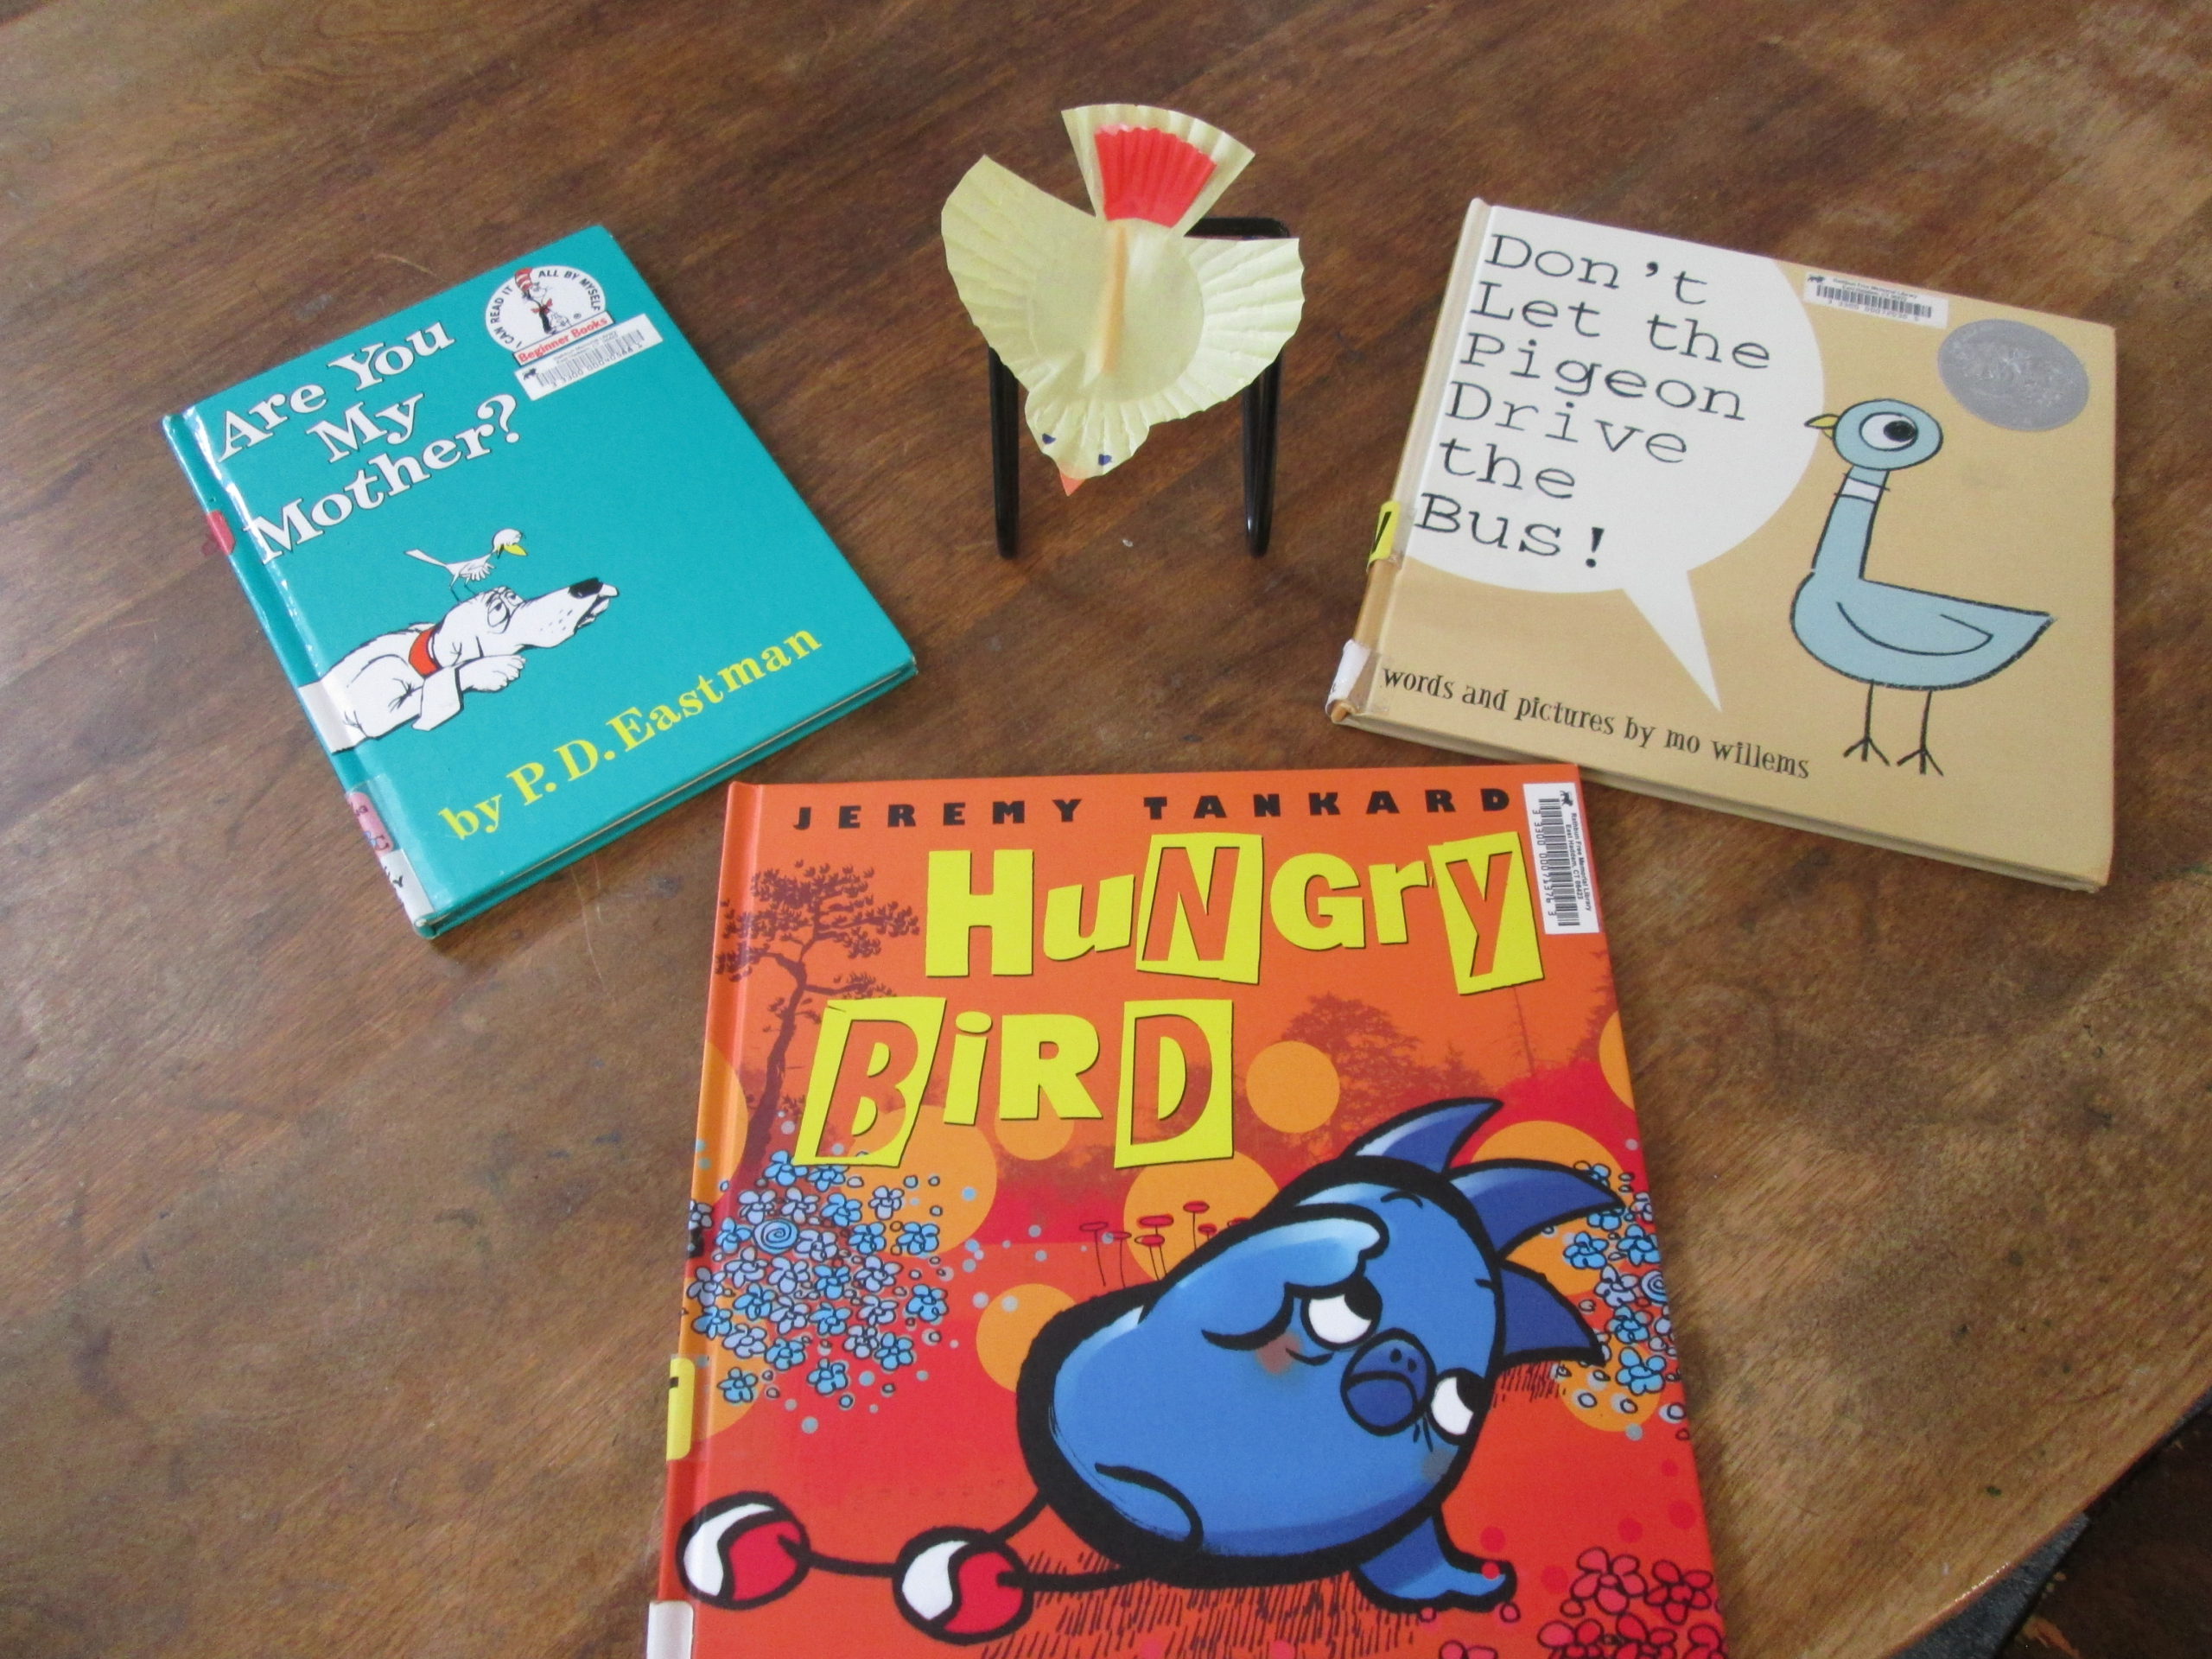 Tuesday Storytime April 25th